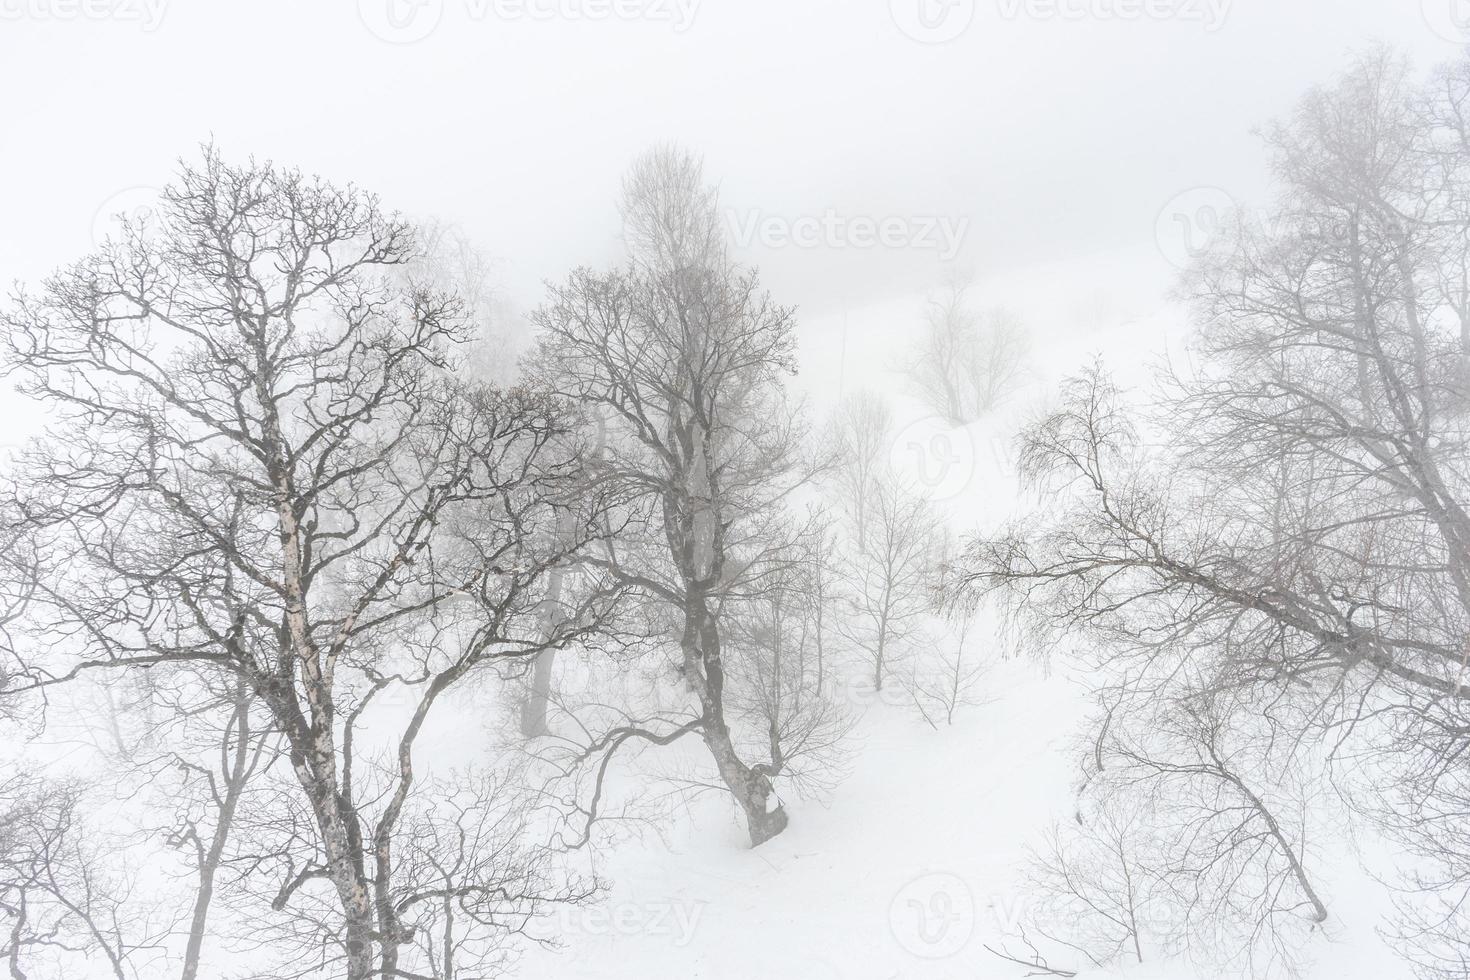 Covered with snow Caucasus mountain photo